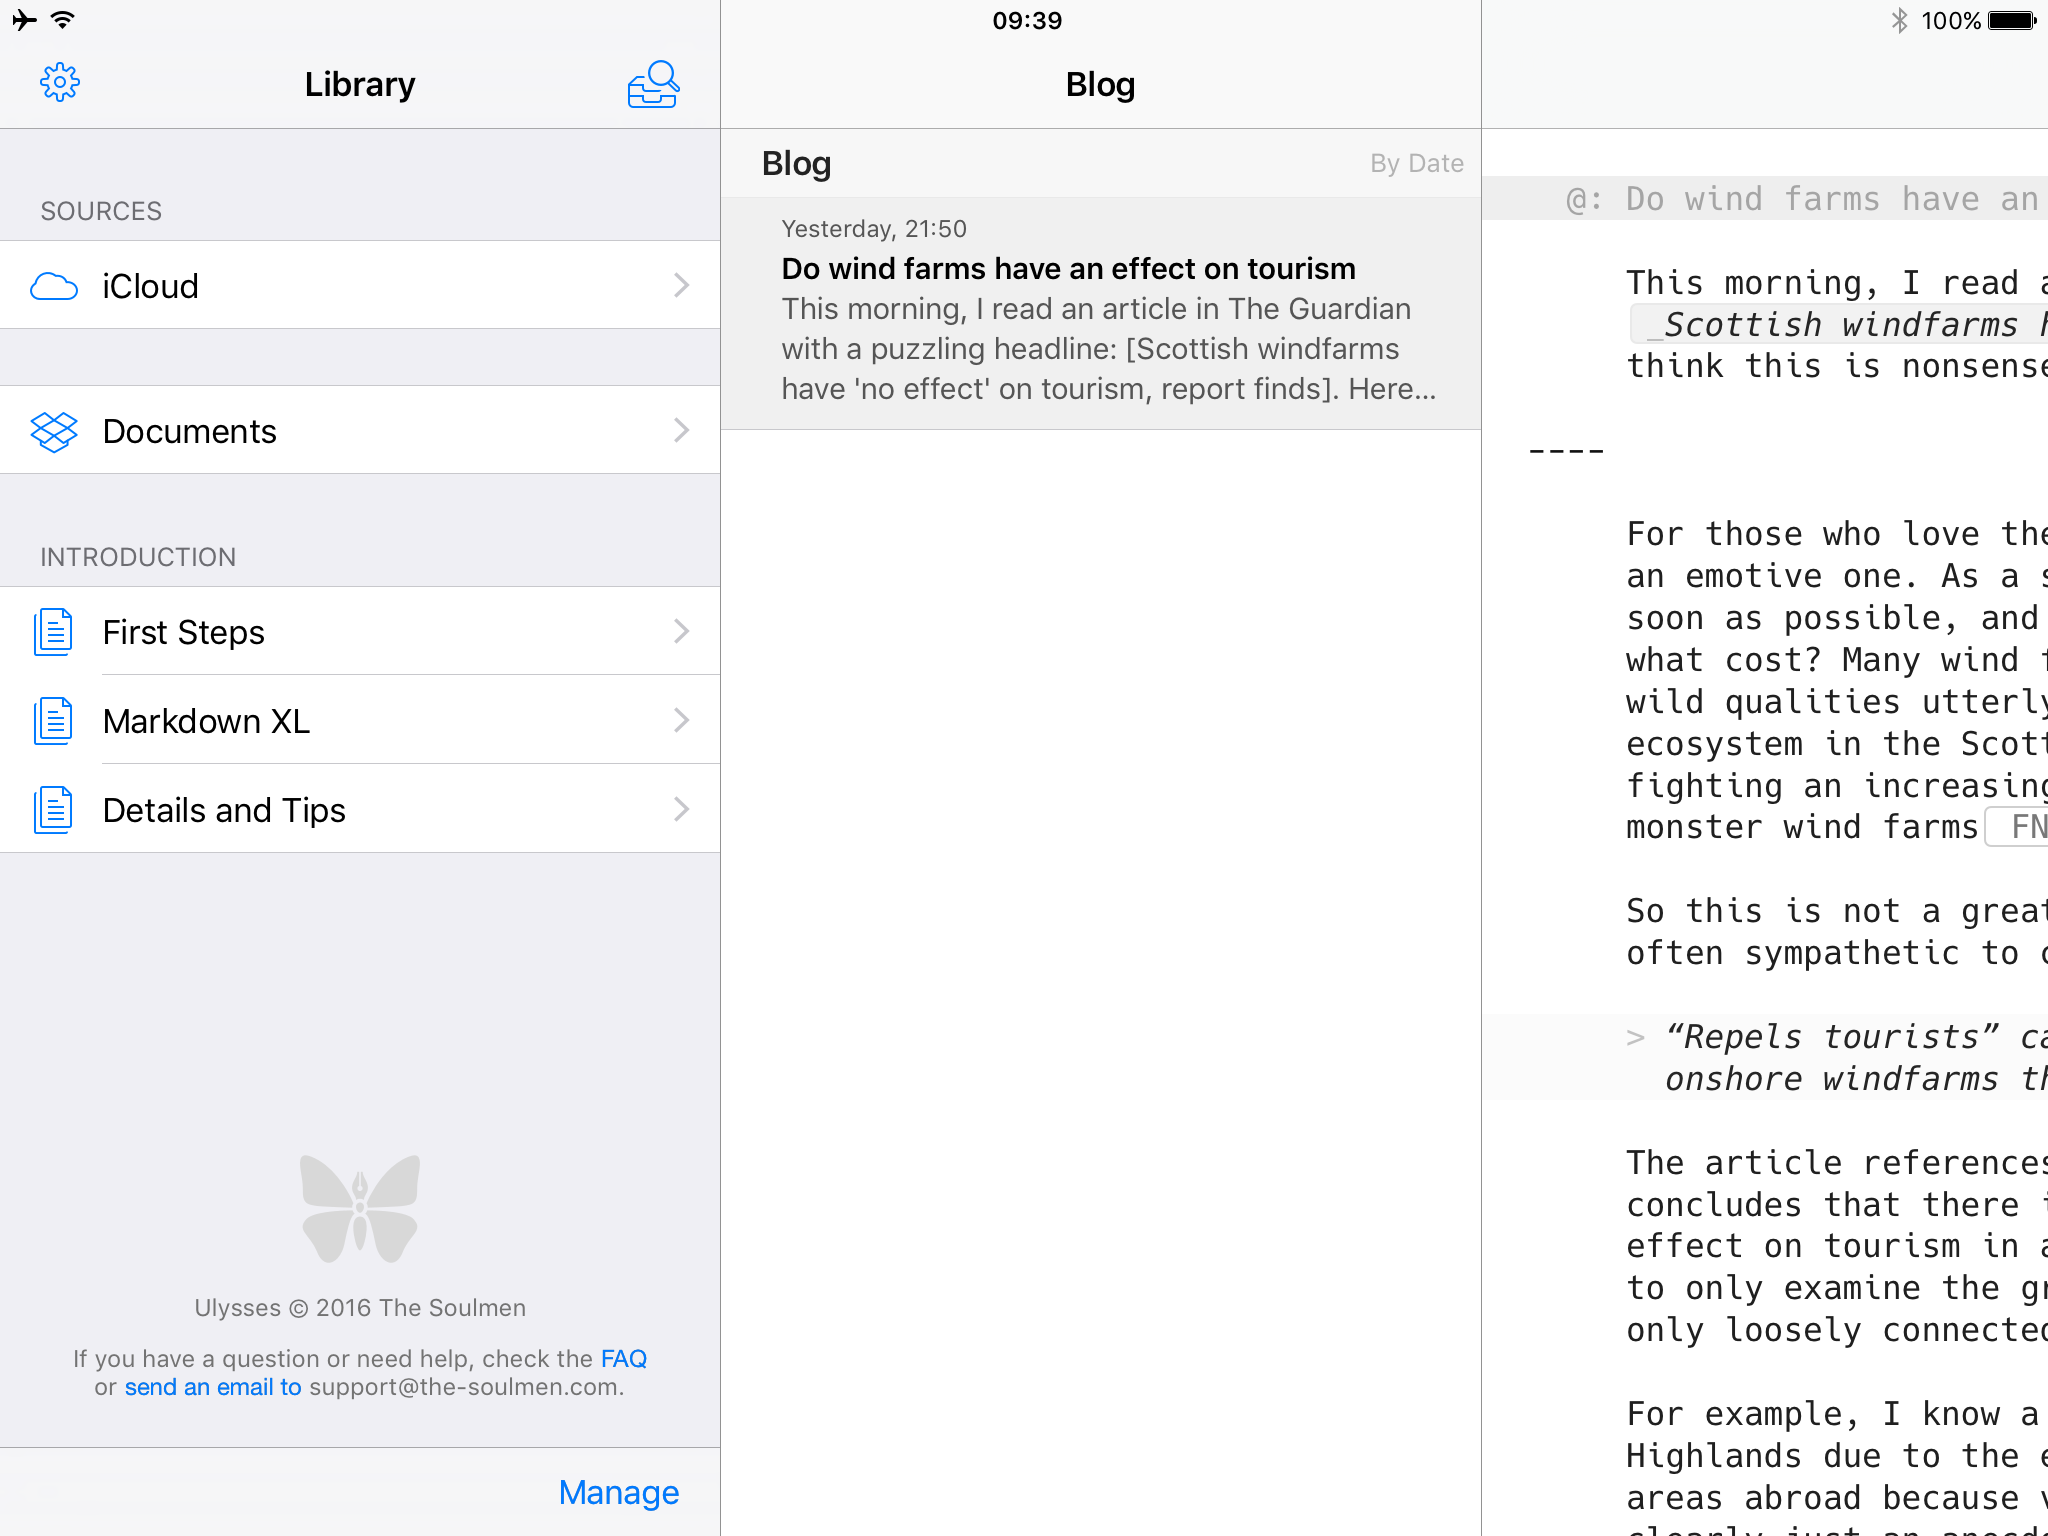 Both data sources – iCloud and Dropbox – displayed in the iOS version